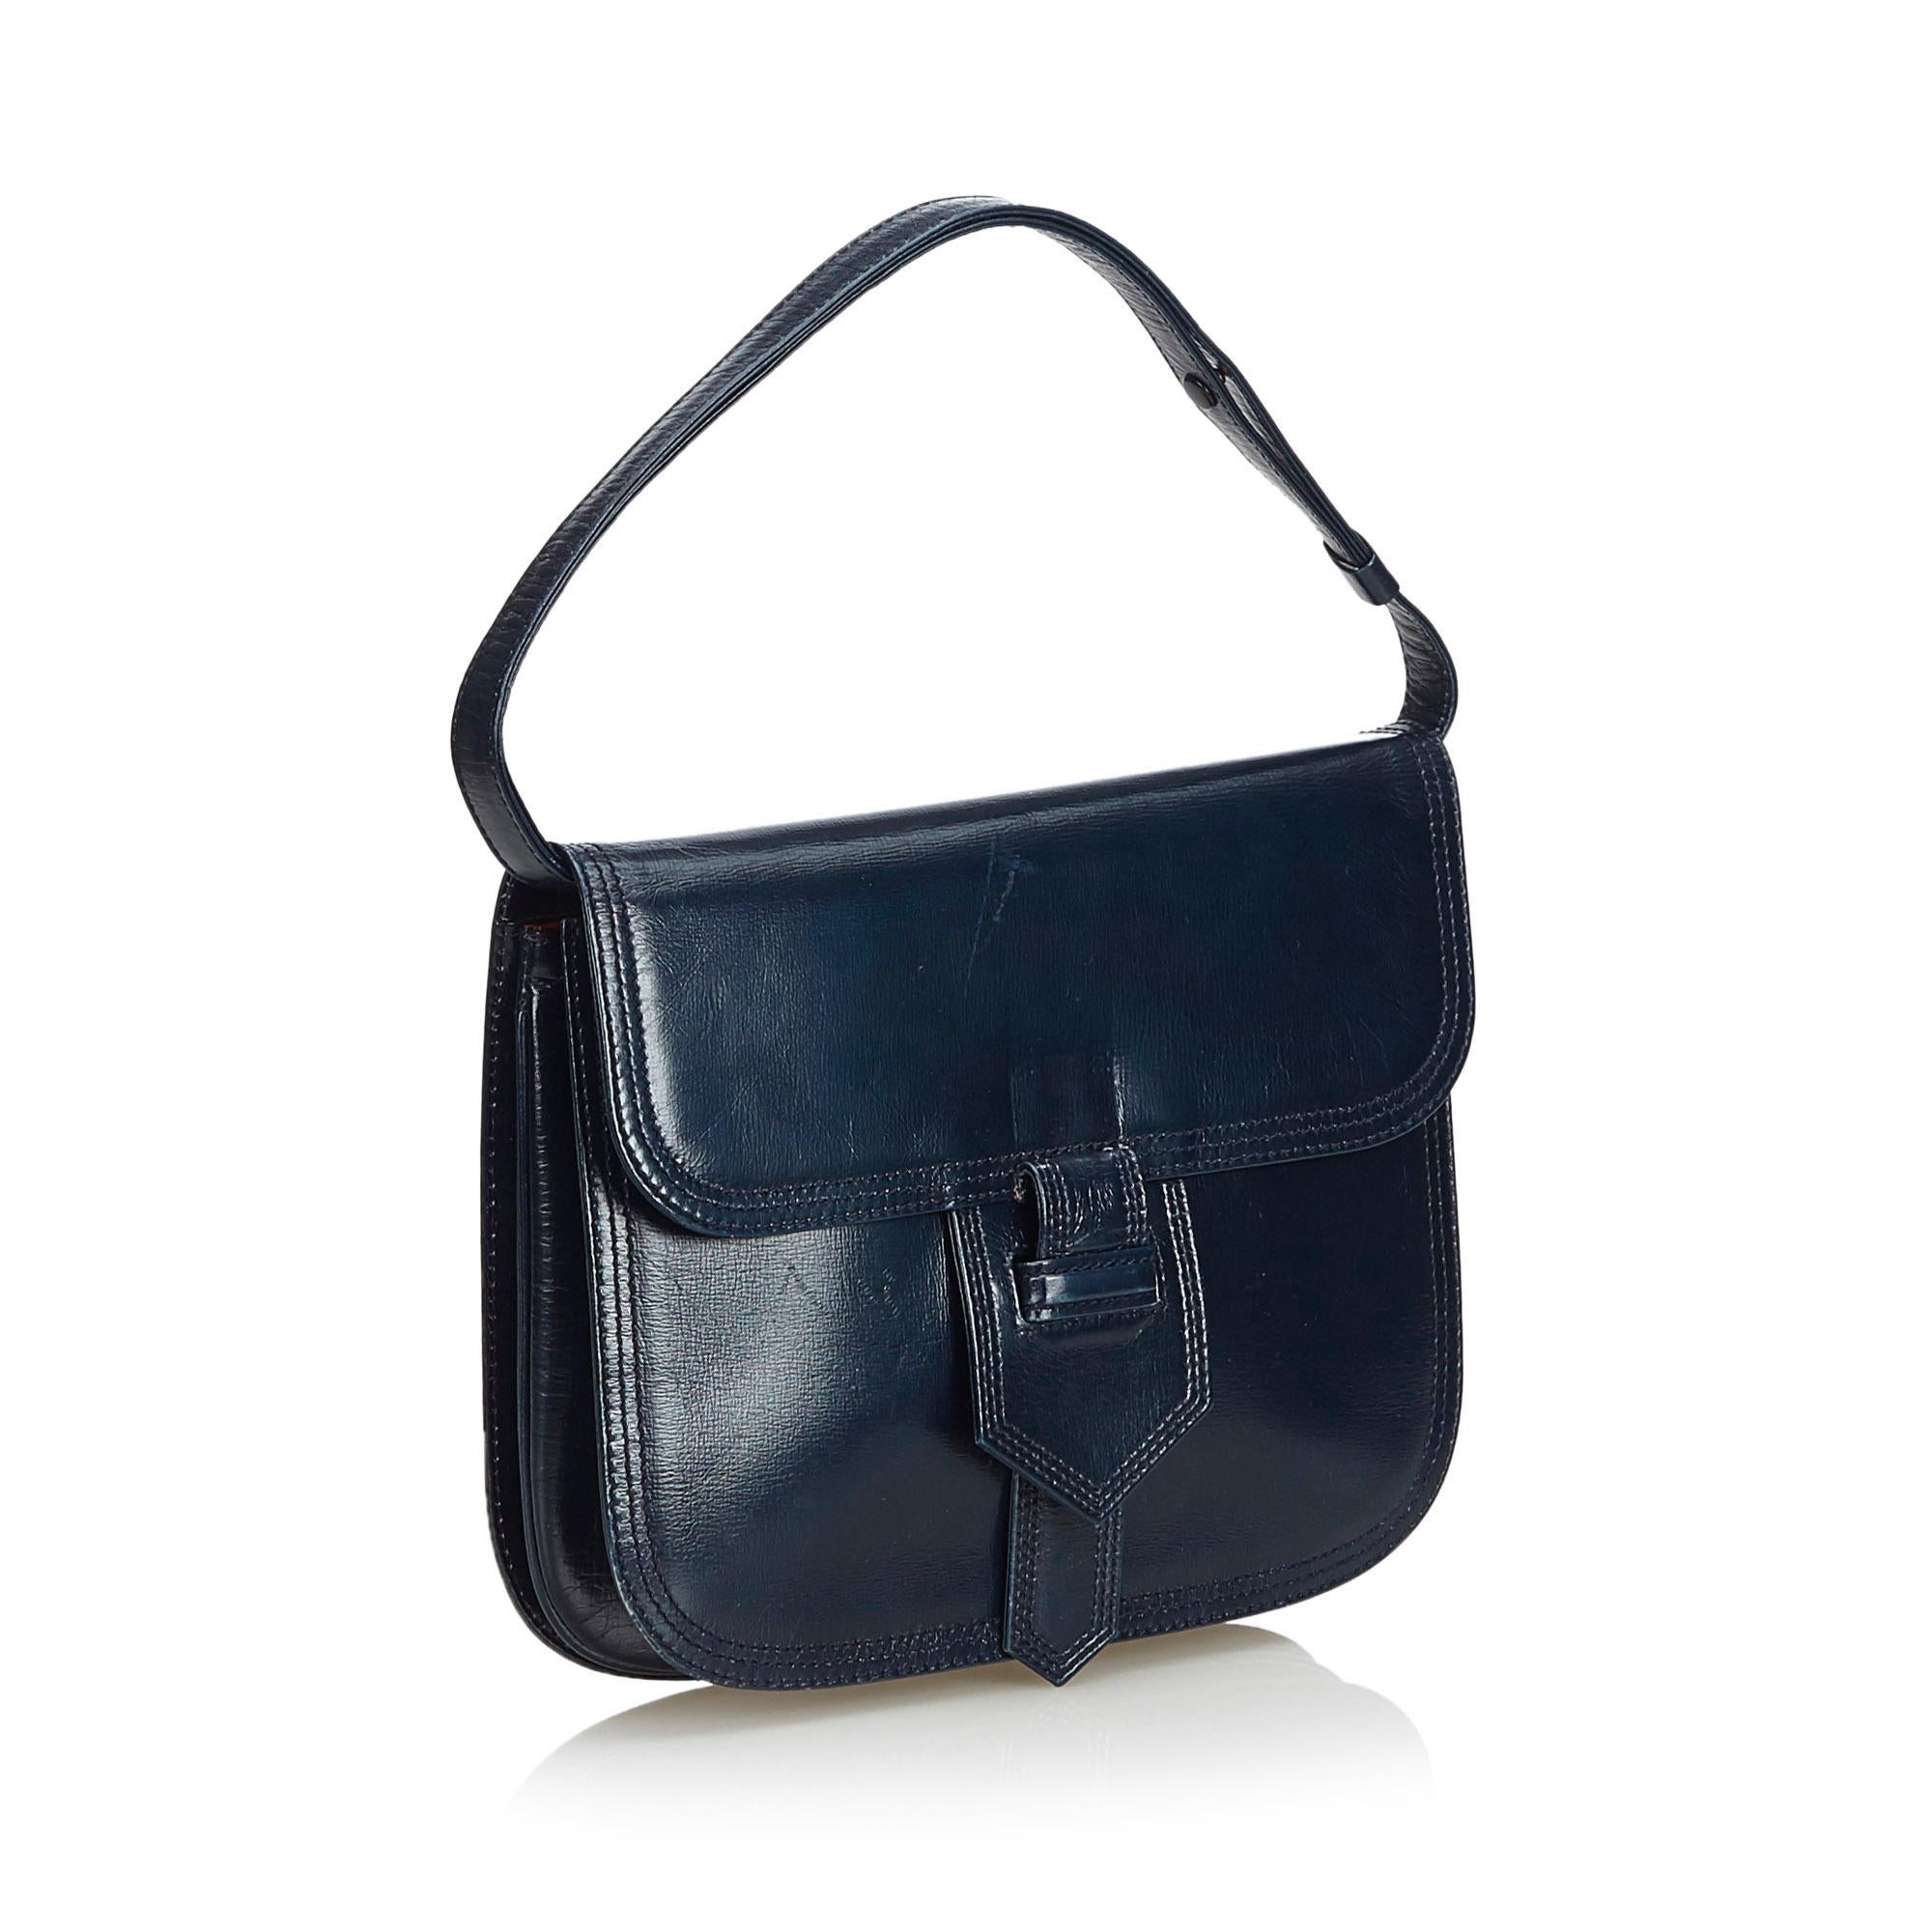 This handbag features a leather body, a flat leather handle, a front flap with a strap closure, and interior zip and slip pocket. It carries as B condition rating.

Inclusions: 
Dust Bag

Dimensions:
Length: 21.00 cm
Width: 24.50 cm
Depth: 2.00